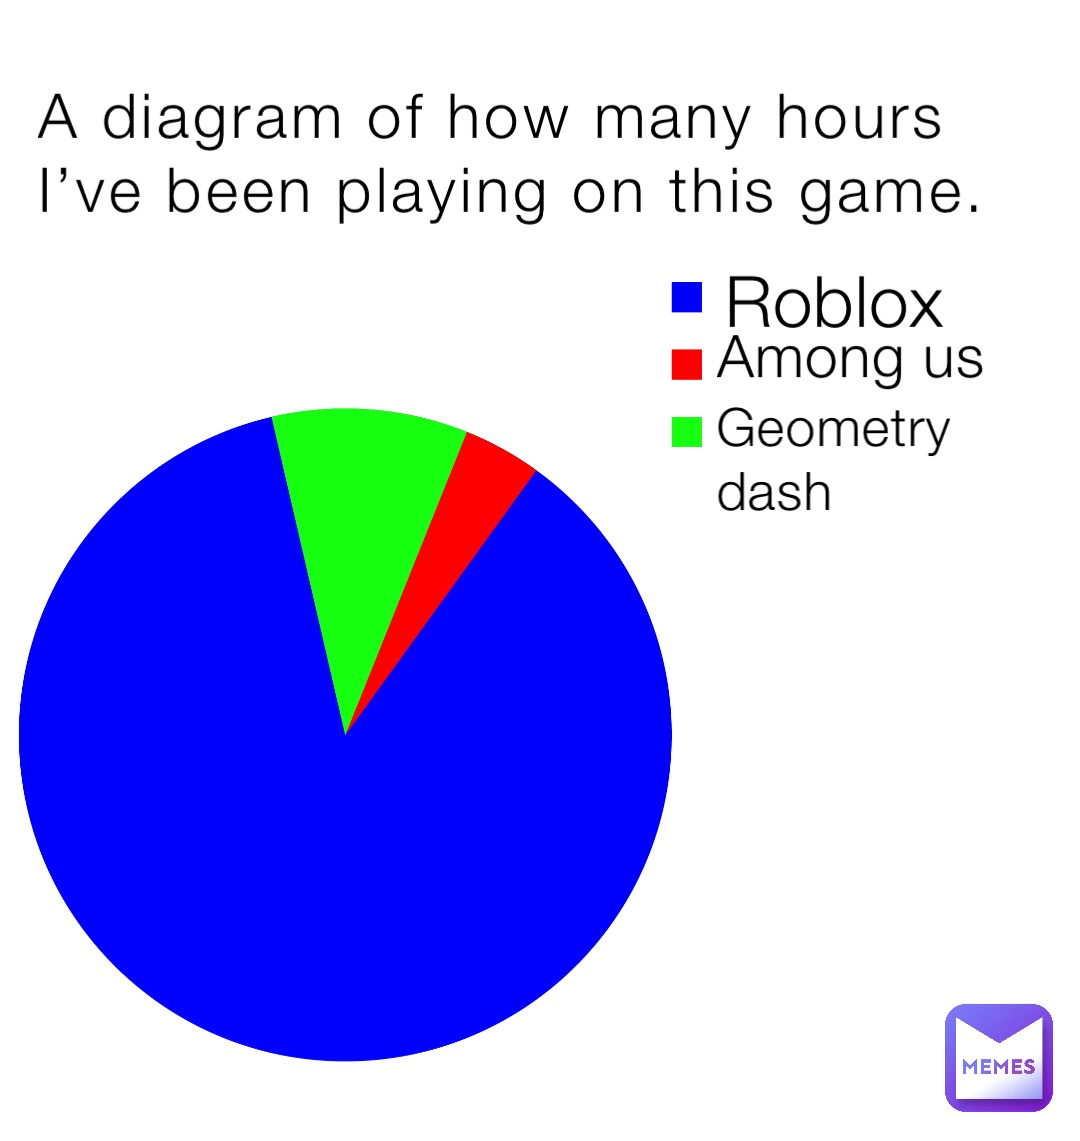 A diagram of how many hours I’ve been playing on this game. Roblox Geometry dash Among us